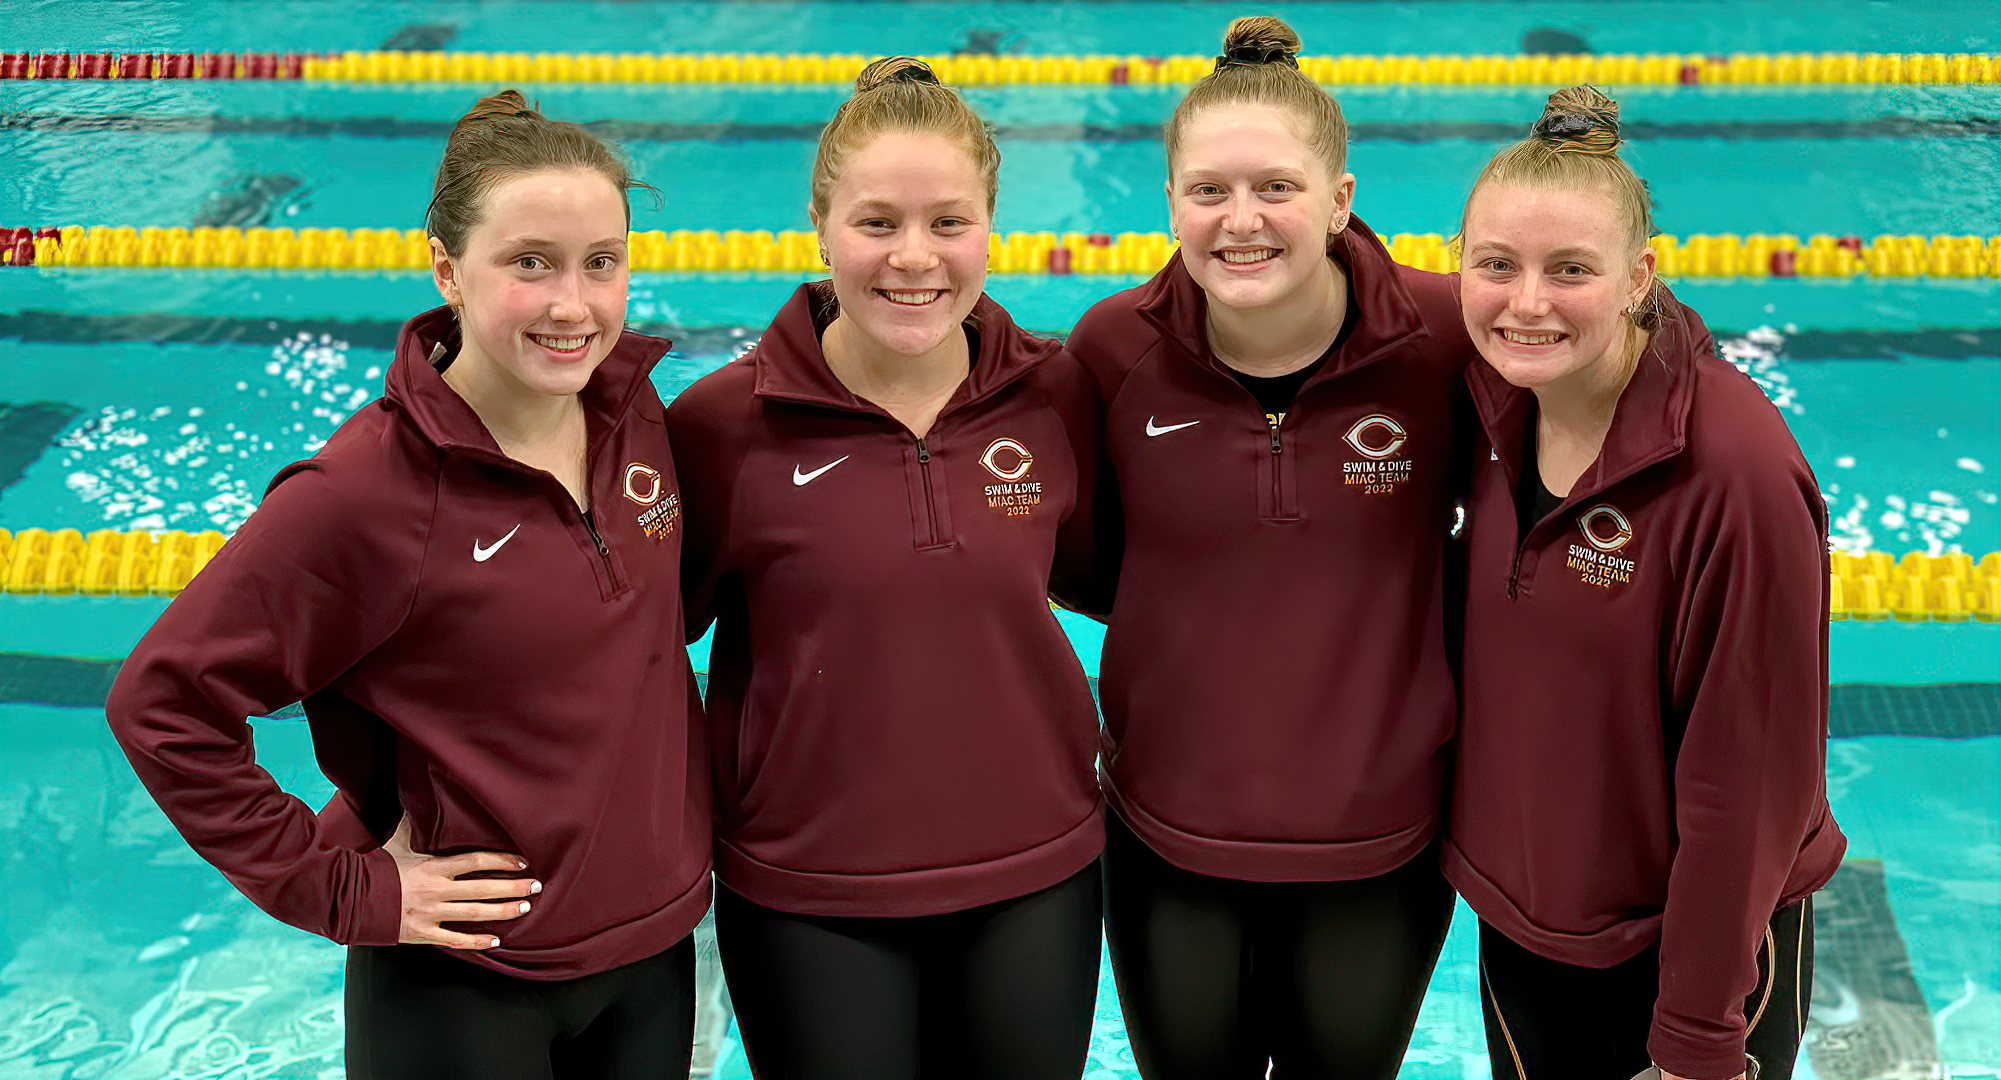 The 200-free relay team of Hailey Jaeger, Jess Bray, Camille Gunderson and Kaitlin Cramer was only .65 of a second from breaking the school record.